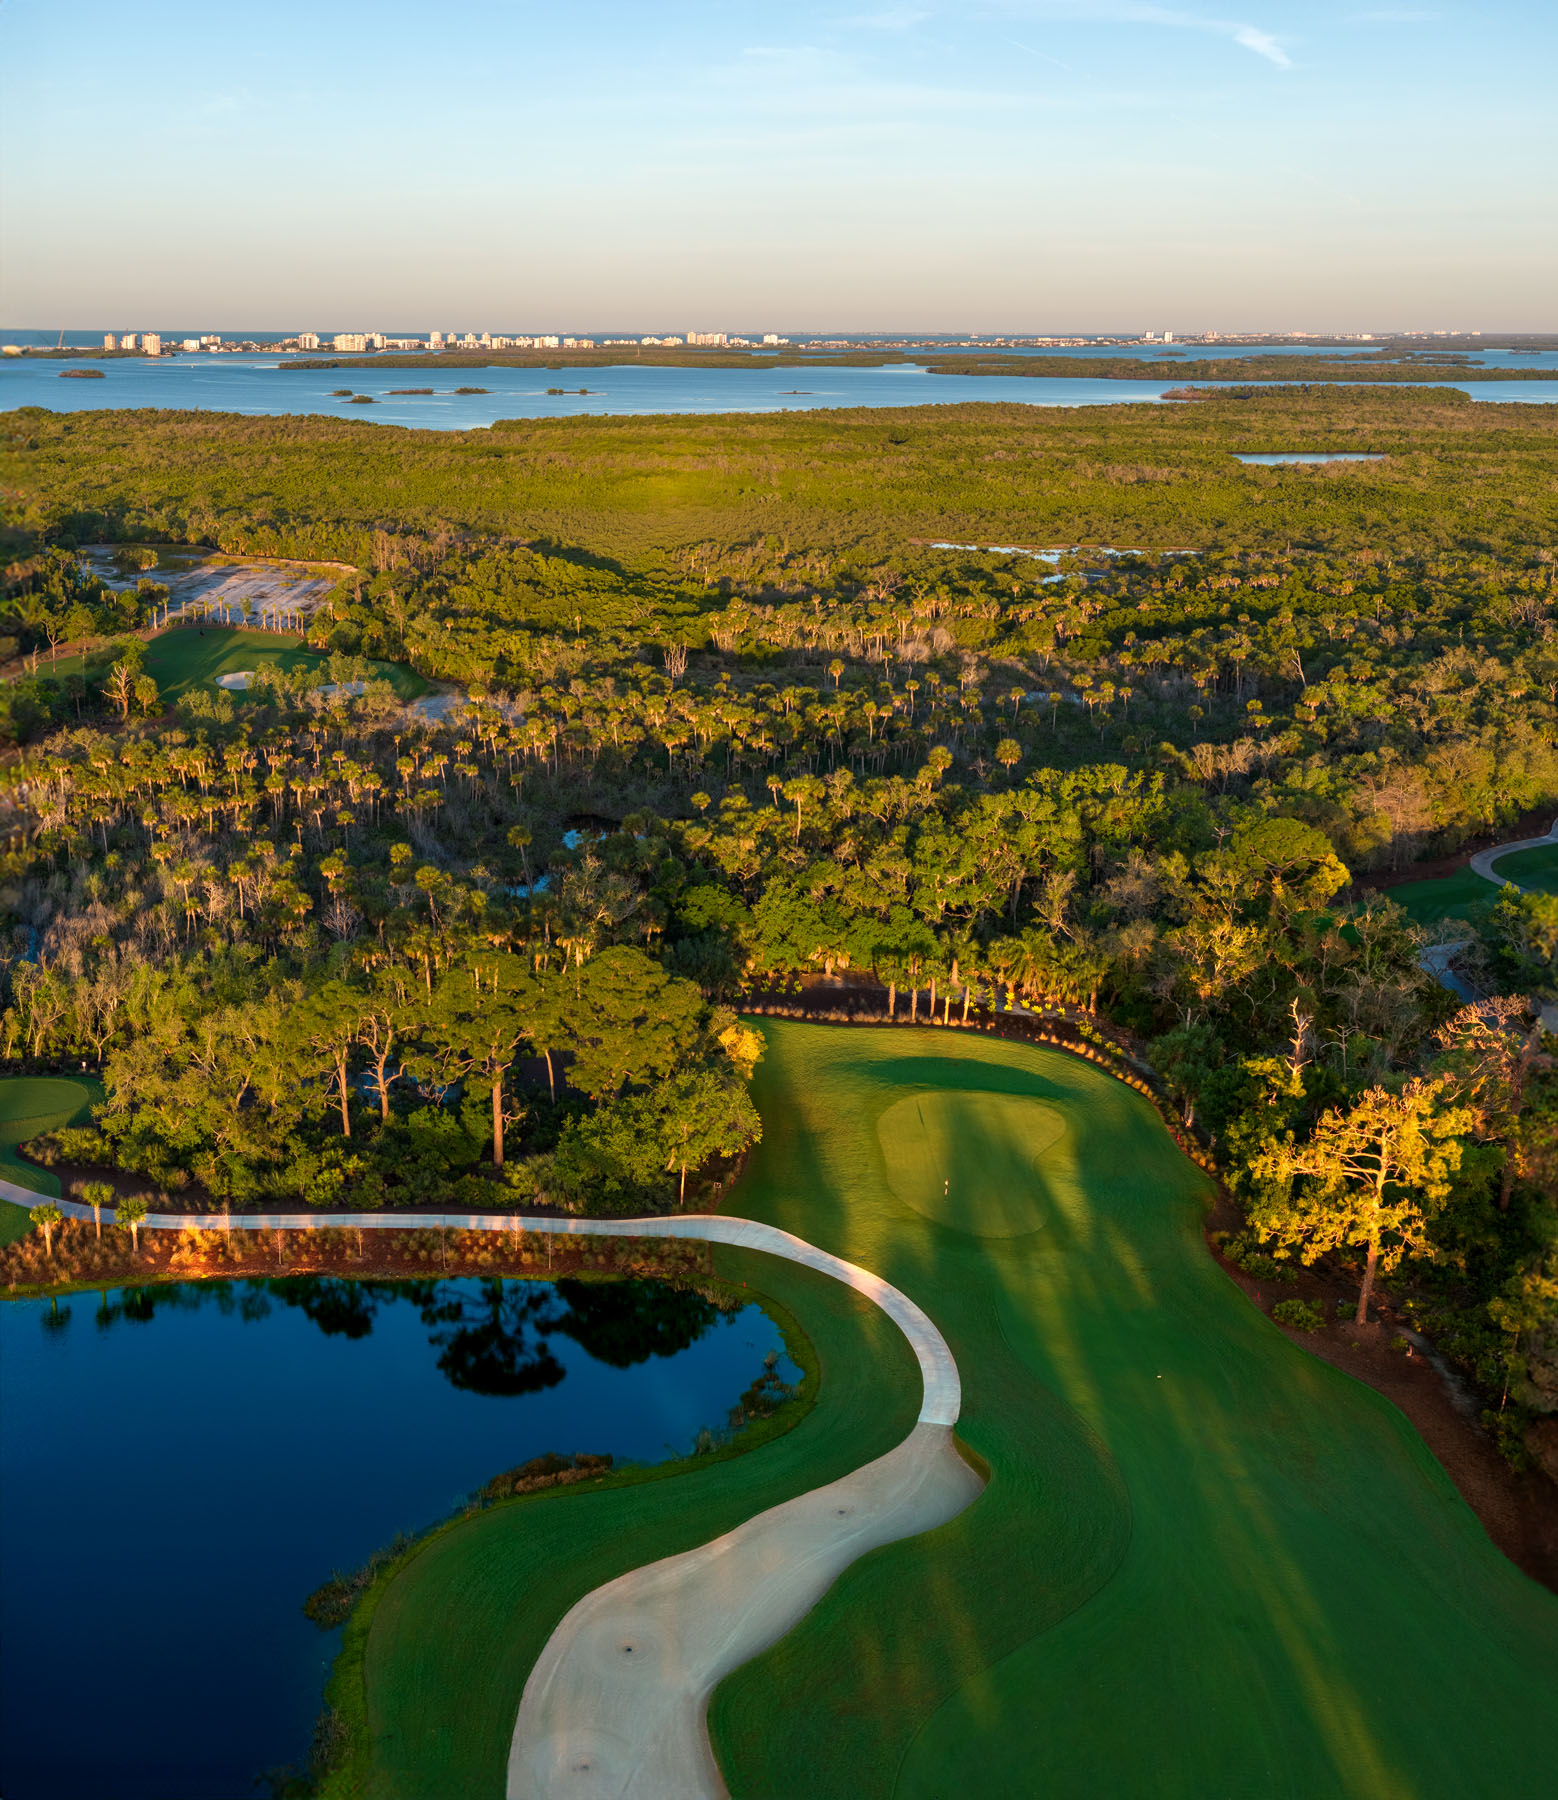 Aerial view of a golf course with a sand trap, water hazard, and neatly trimmed fairway, surrounded by dense greenery and bordered by a body of water in the distance.